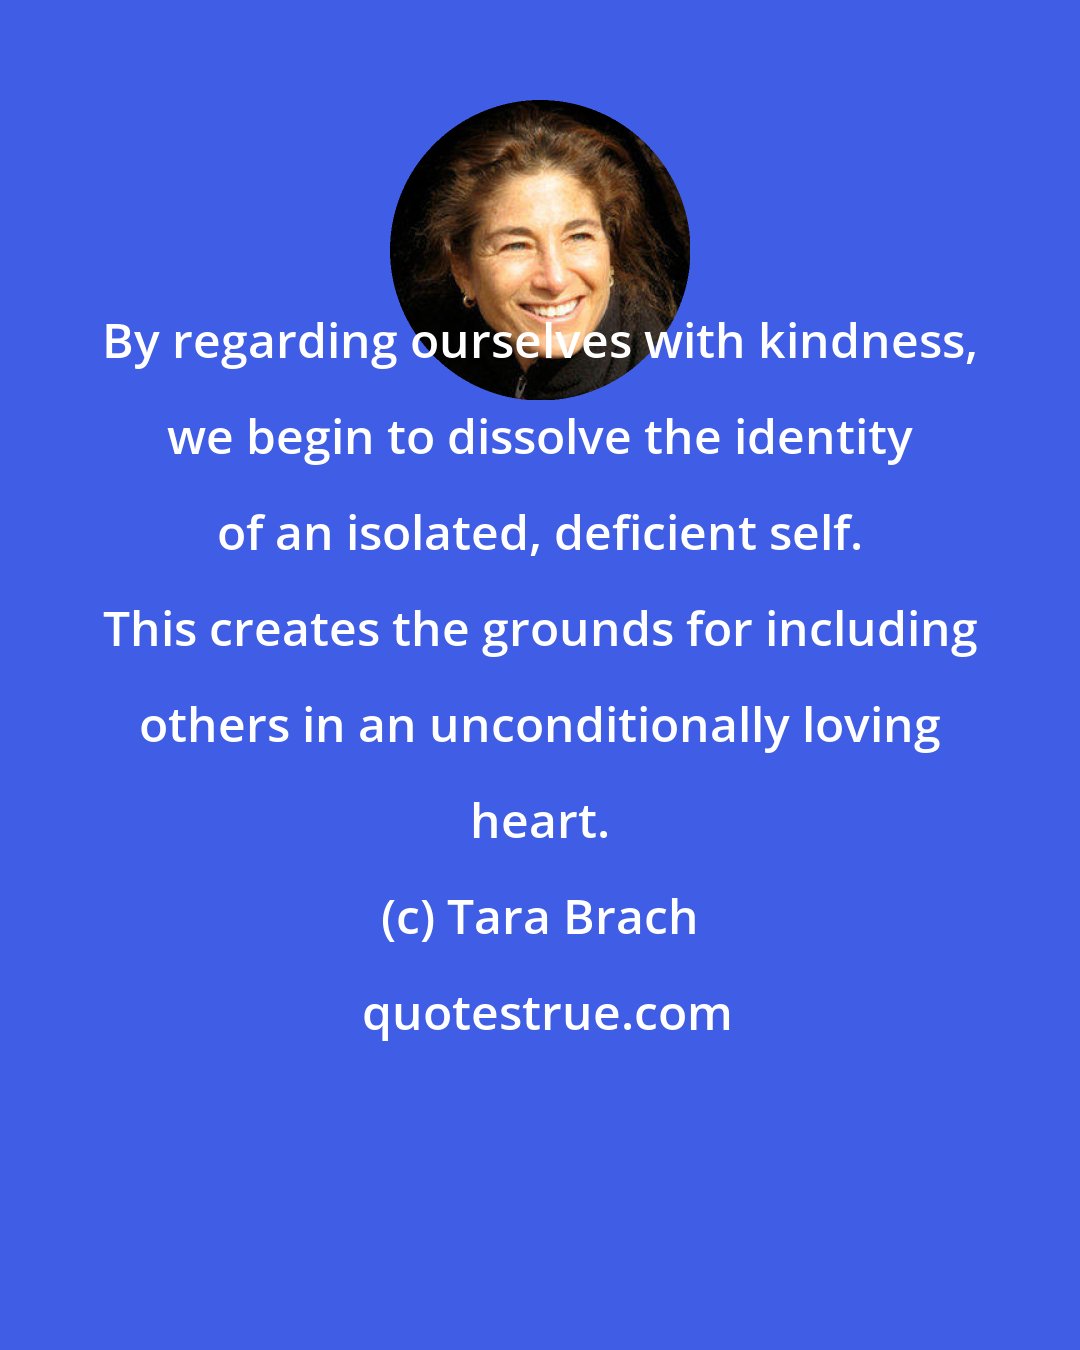 Tara Brach: By regarding ourselves with kindness, we begin to dissolve the identity of an isolated, deficient self. This creates the grounds for including others in an unconditionally loving heart.